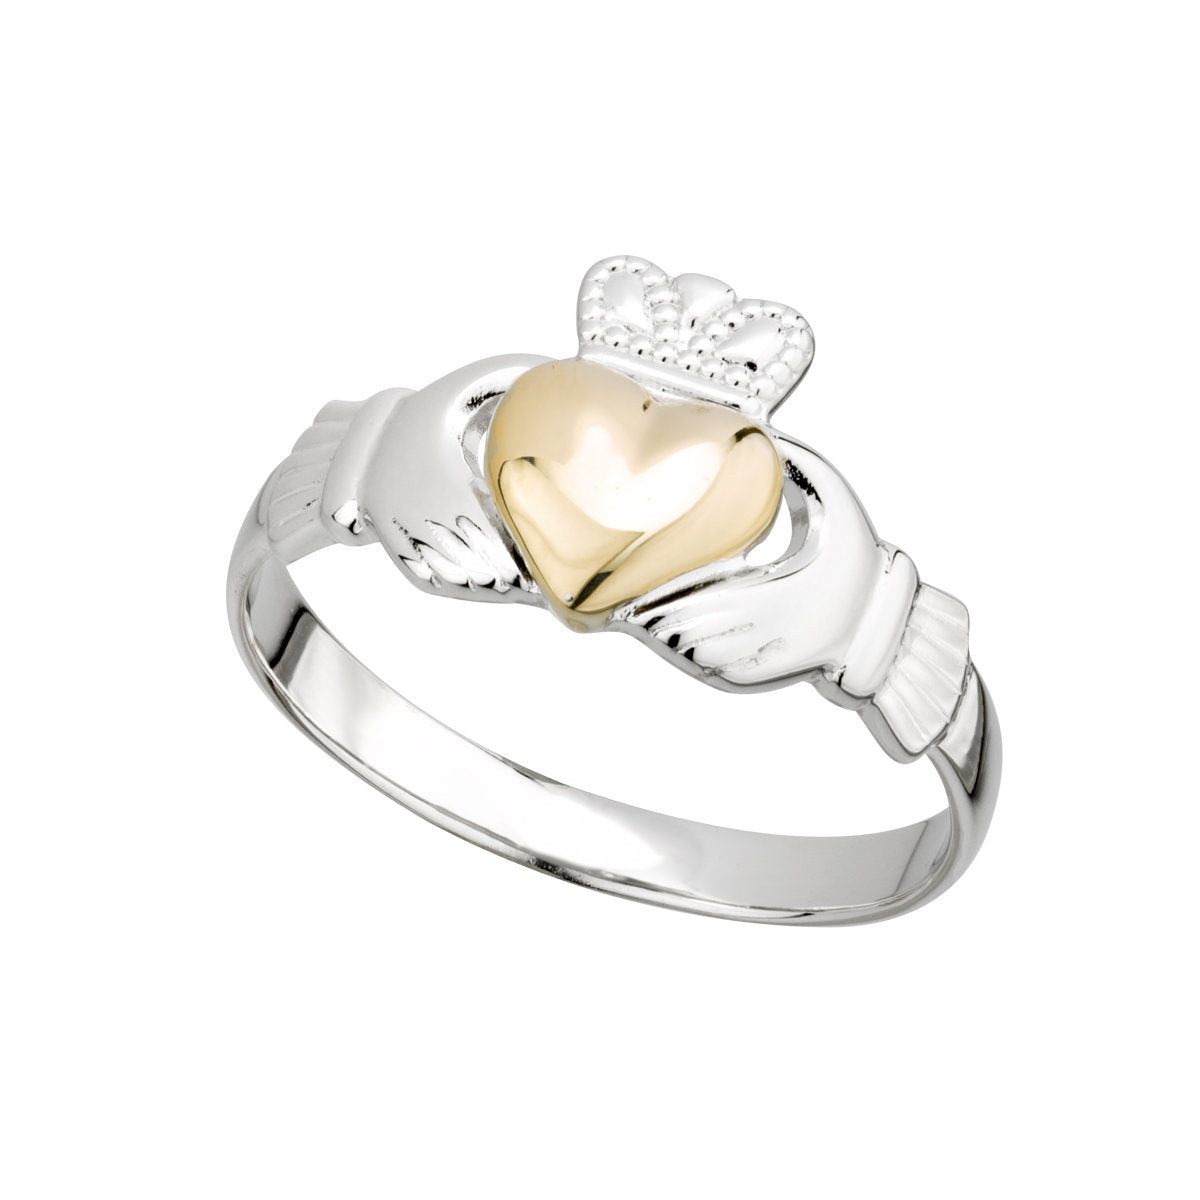 Sterling Silver and 10ct Gold Heart Claddagh Ring